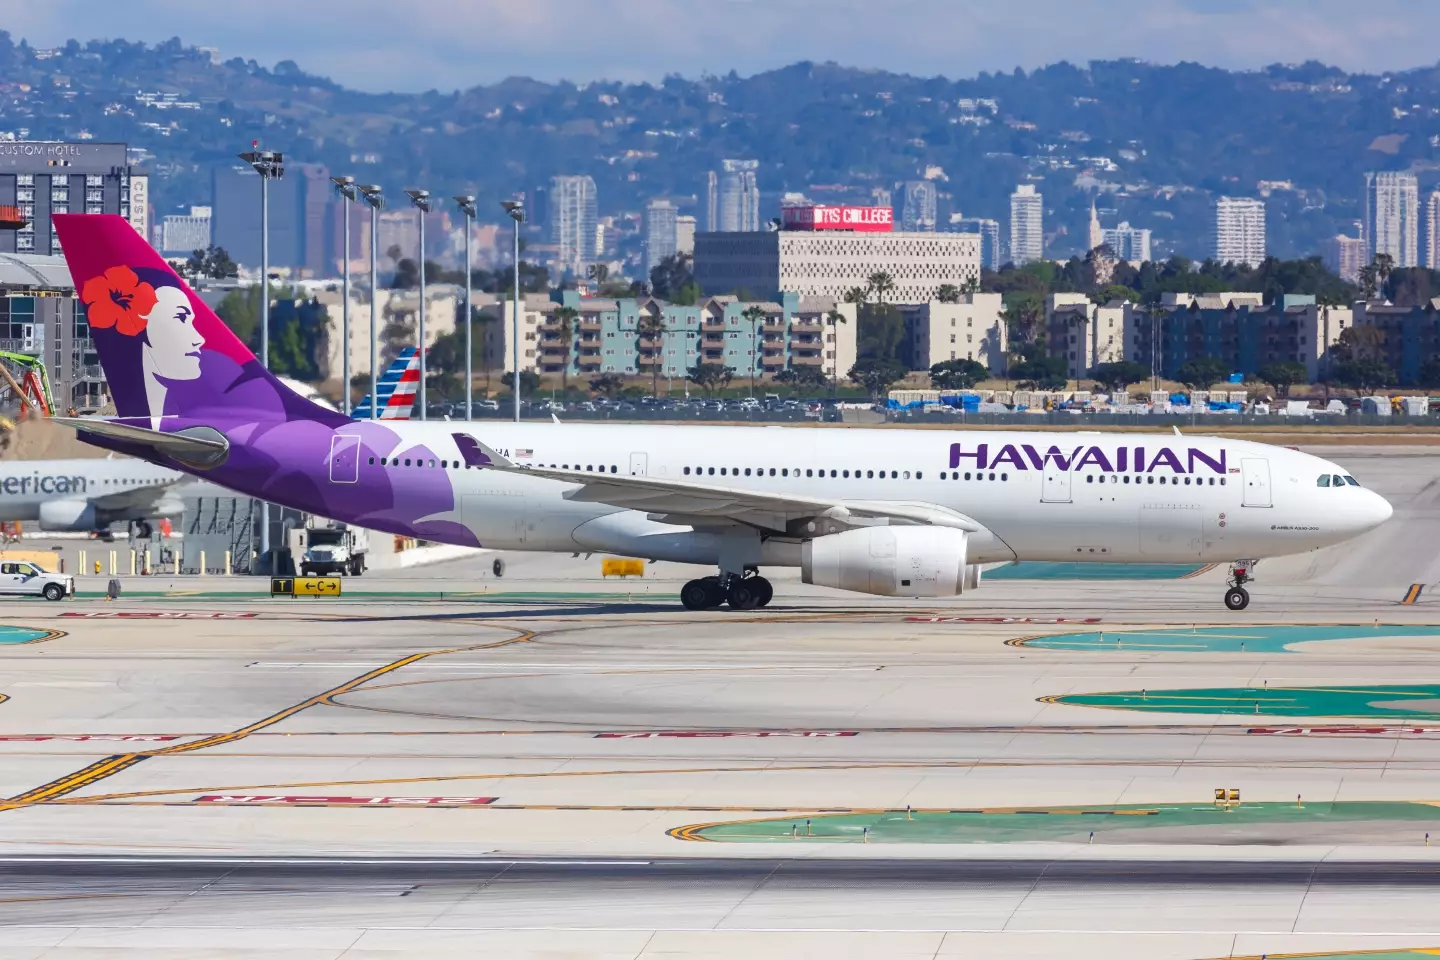 A Hawaiian Airlines Airbus 330, the type of plane involved in the incident.